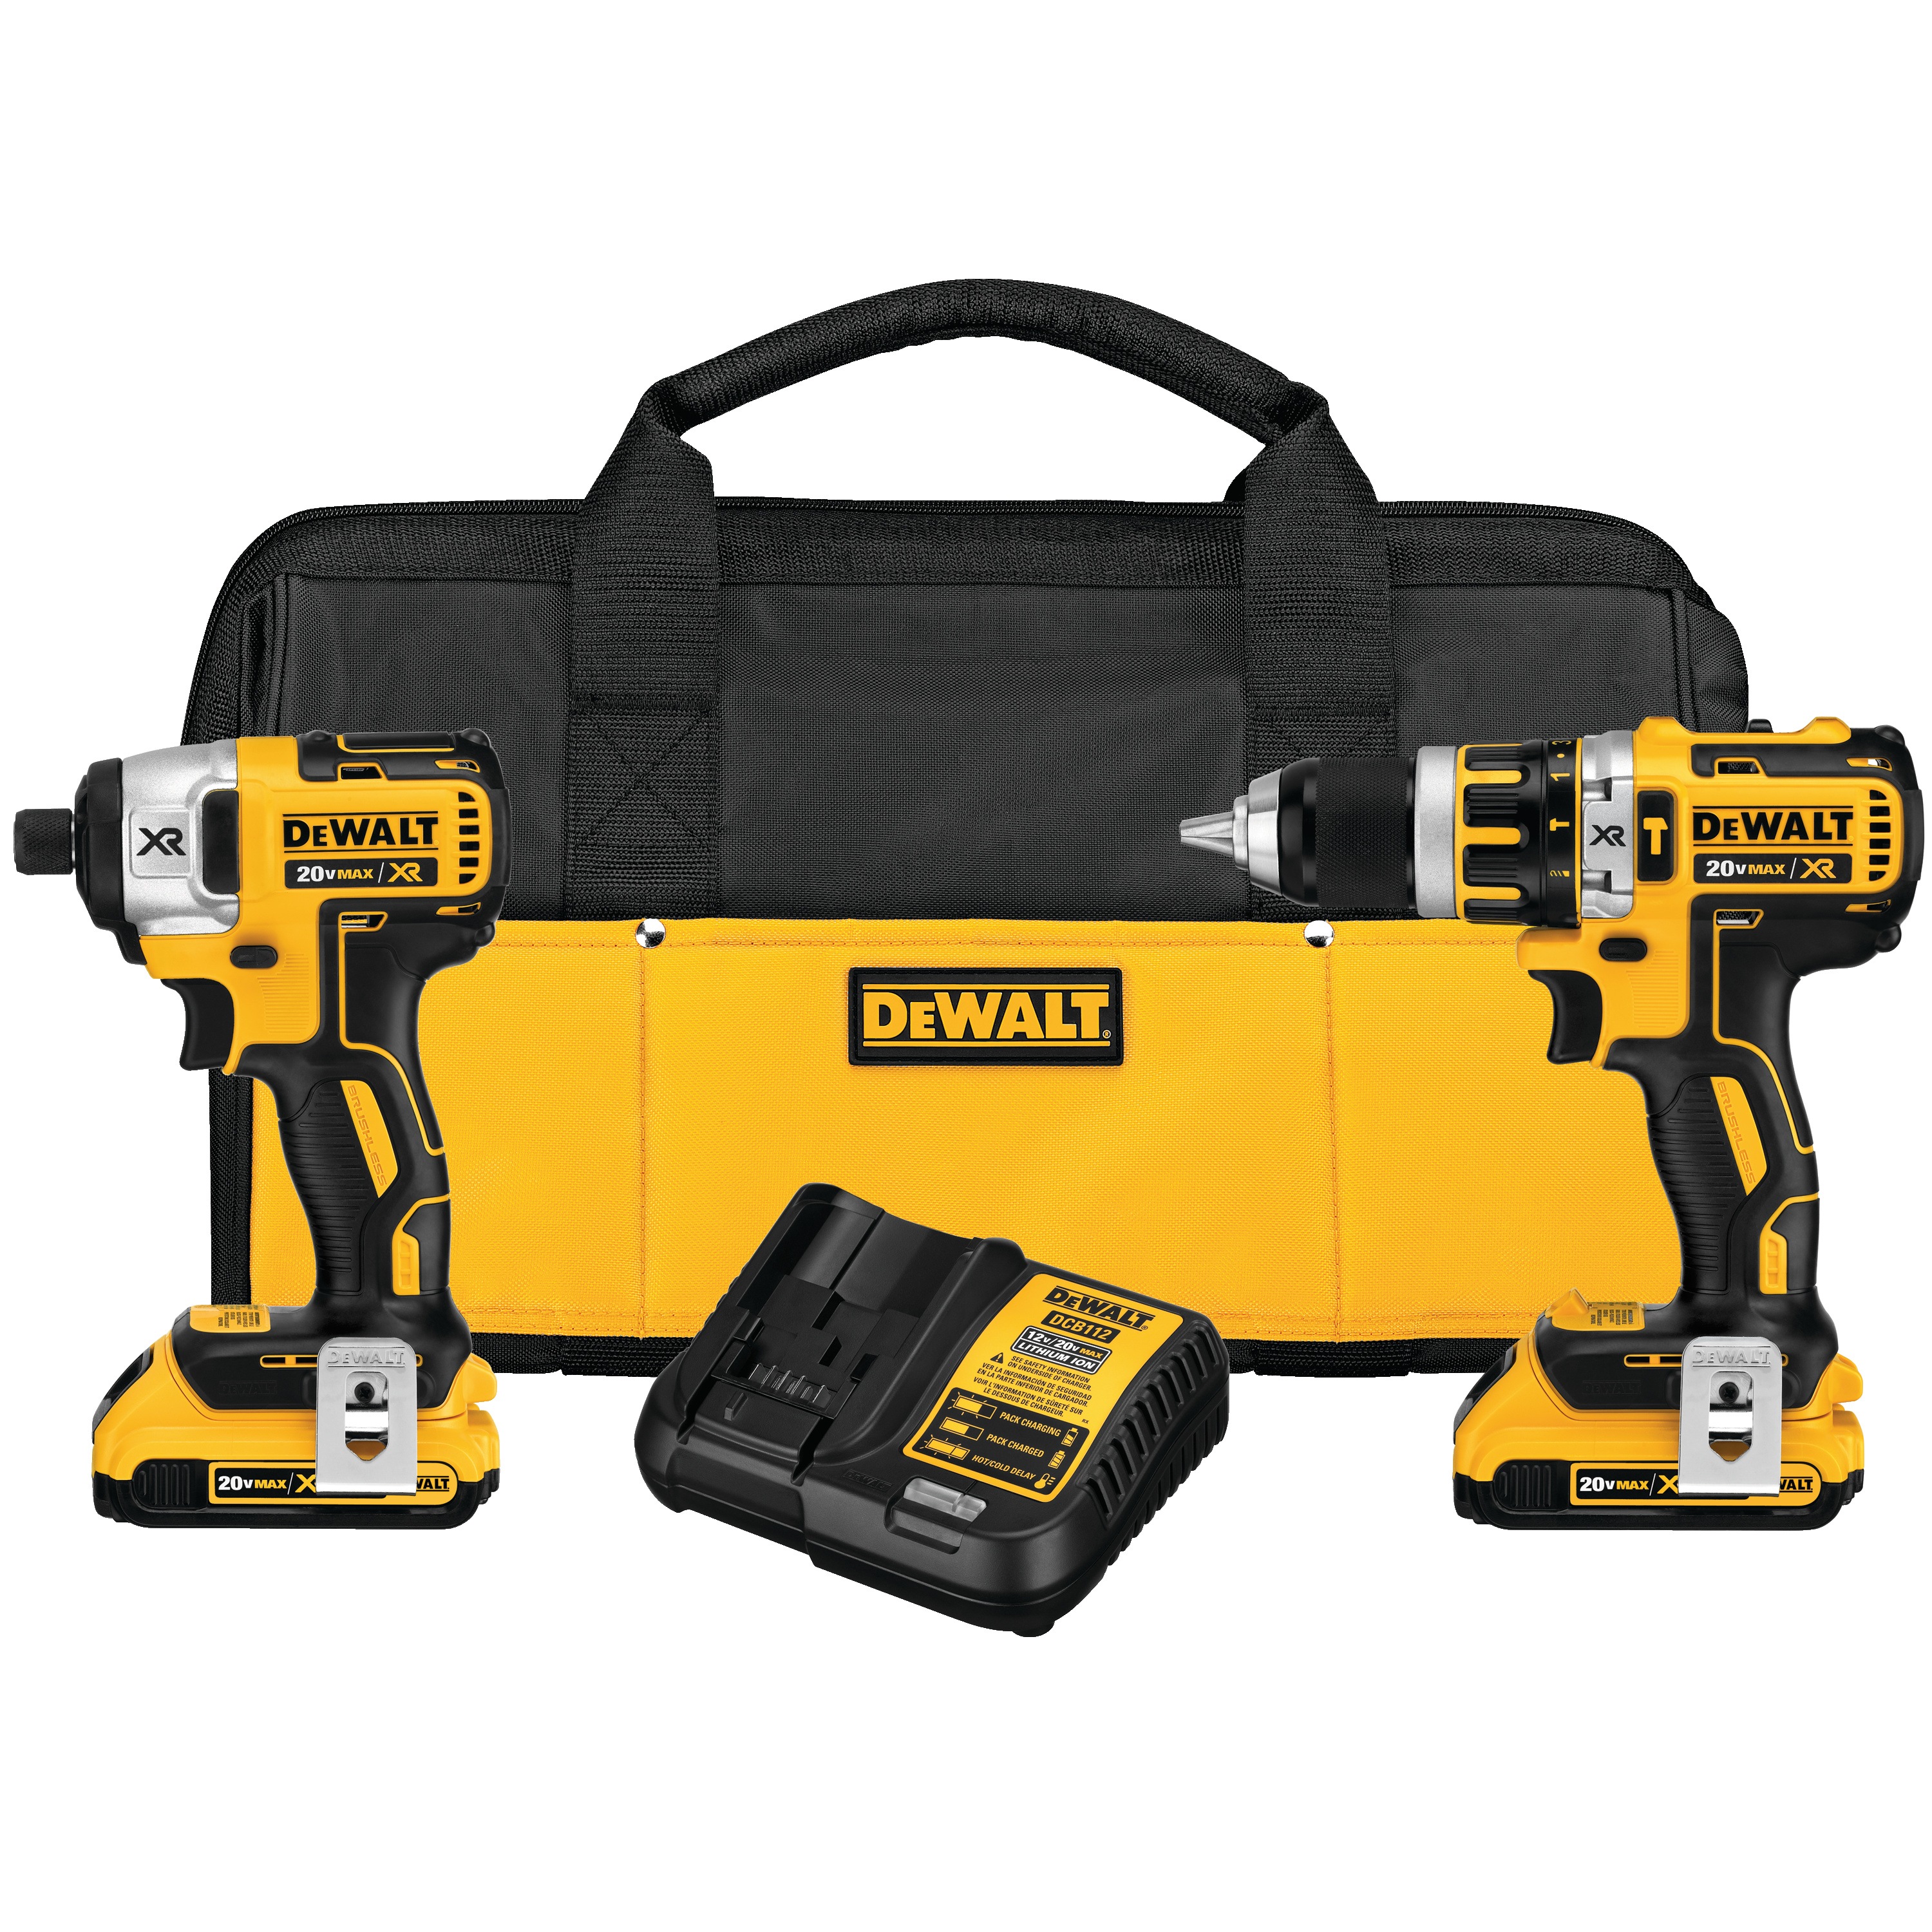 v Max Xr Lithium Ion Brushless Compact Hammerdrill And Impact Driver Combo Kit Dck286d2 Dewalt